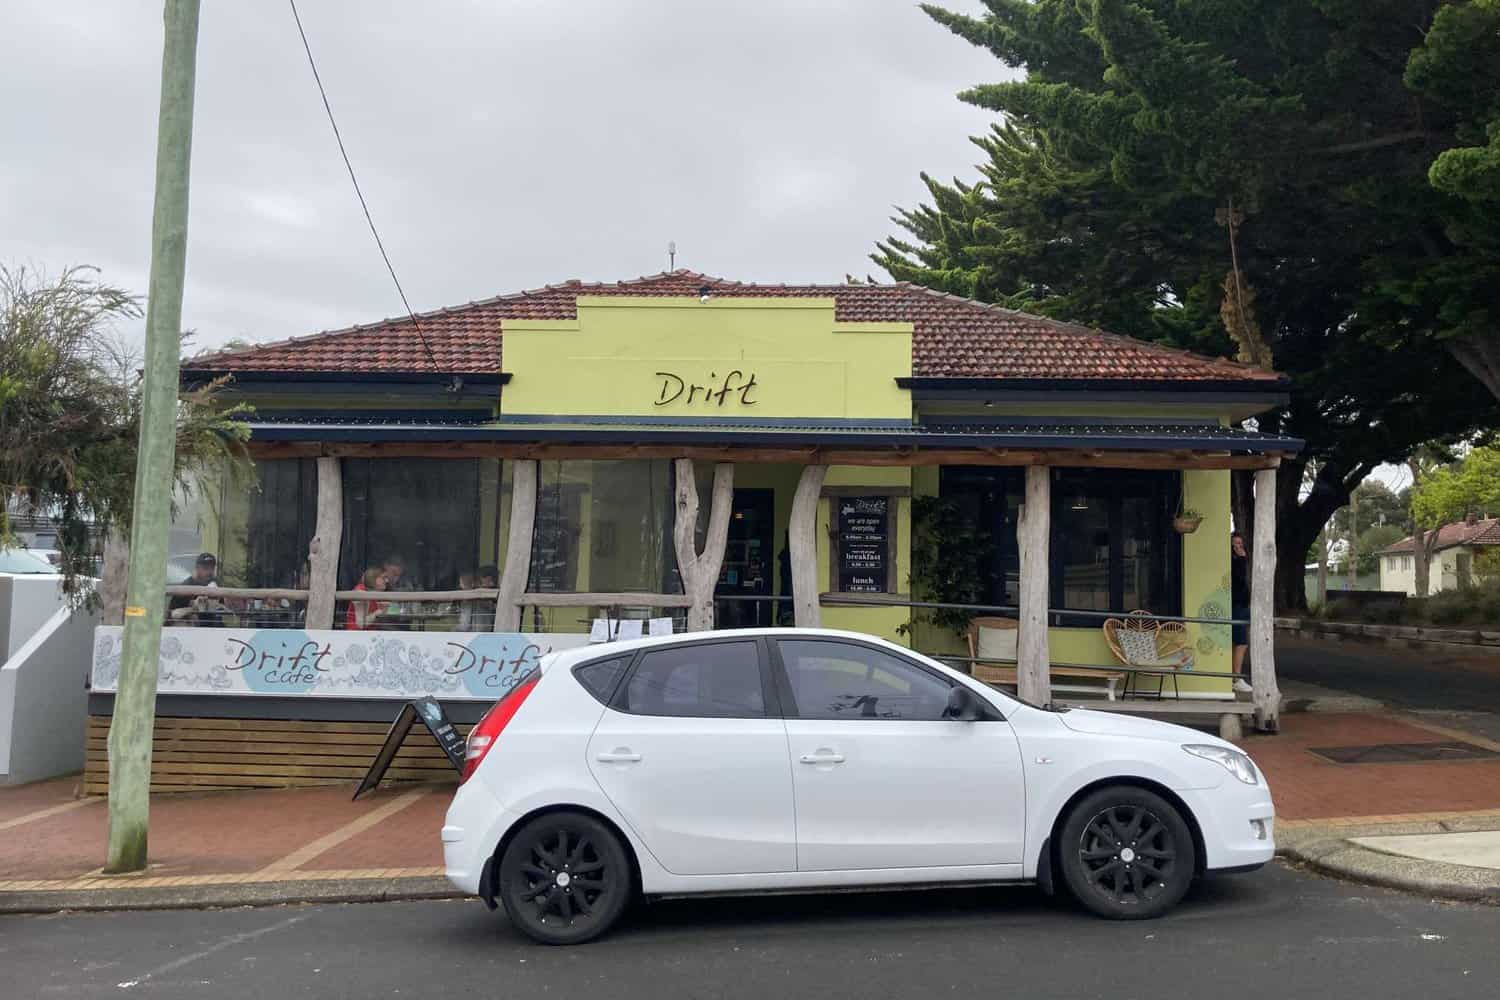 Drift Cafe, one of the best coffee spots in Margaret River, bustling with locals and visitors enjoying their freshly brewed coffee and delectable lunch options at outdoor tables.